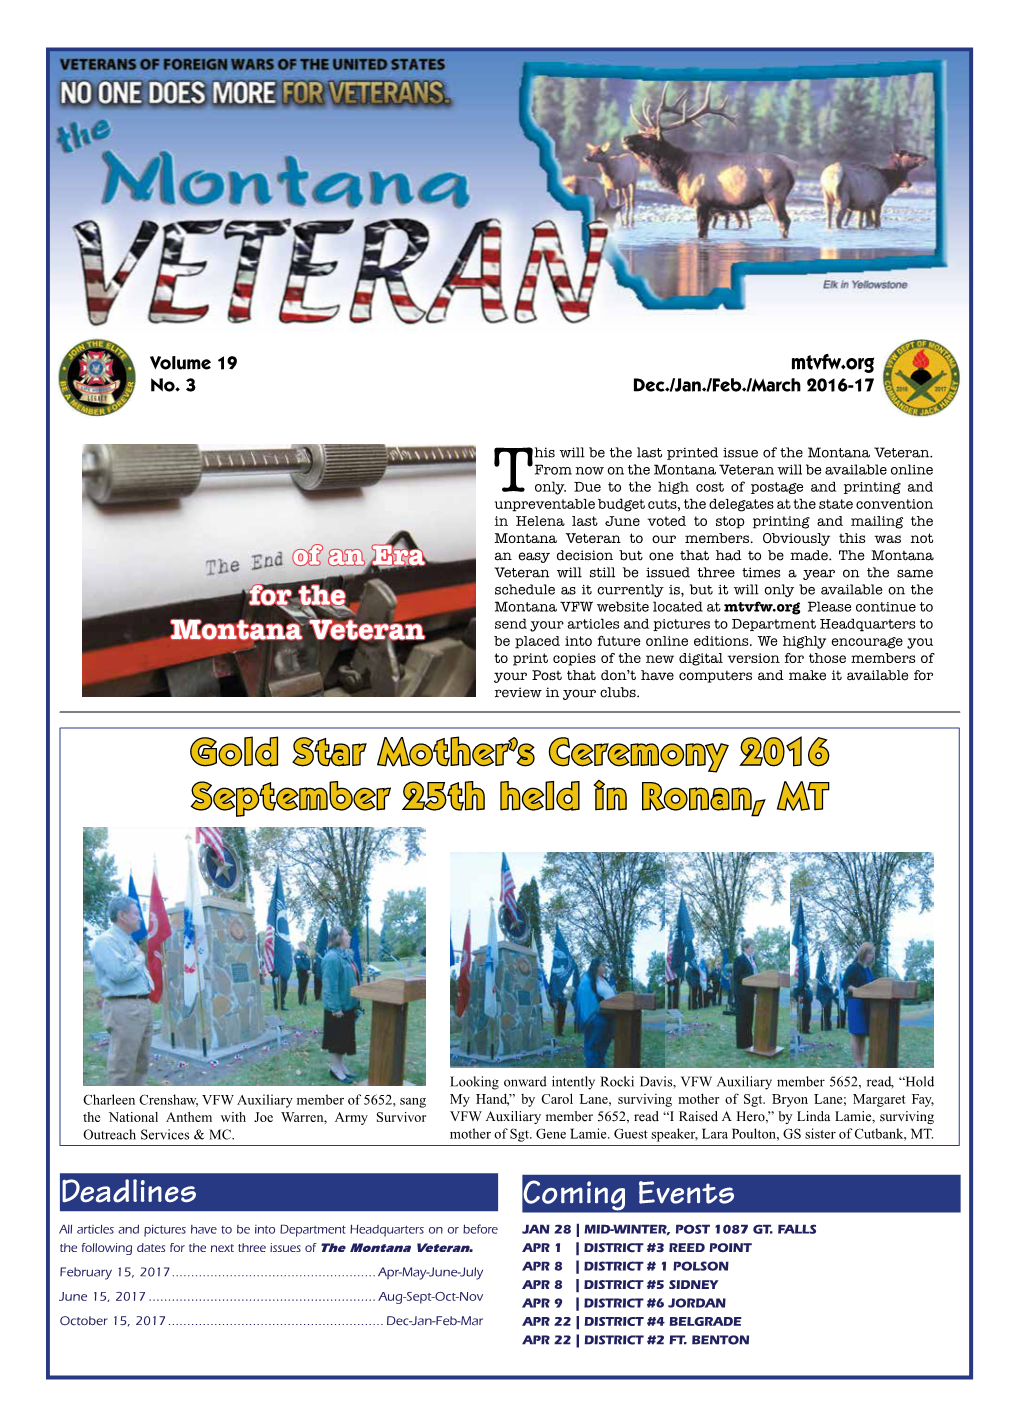 Gold Star Mother's Ceremony 2016 September 25Th Held in Ronan, MT